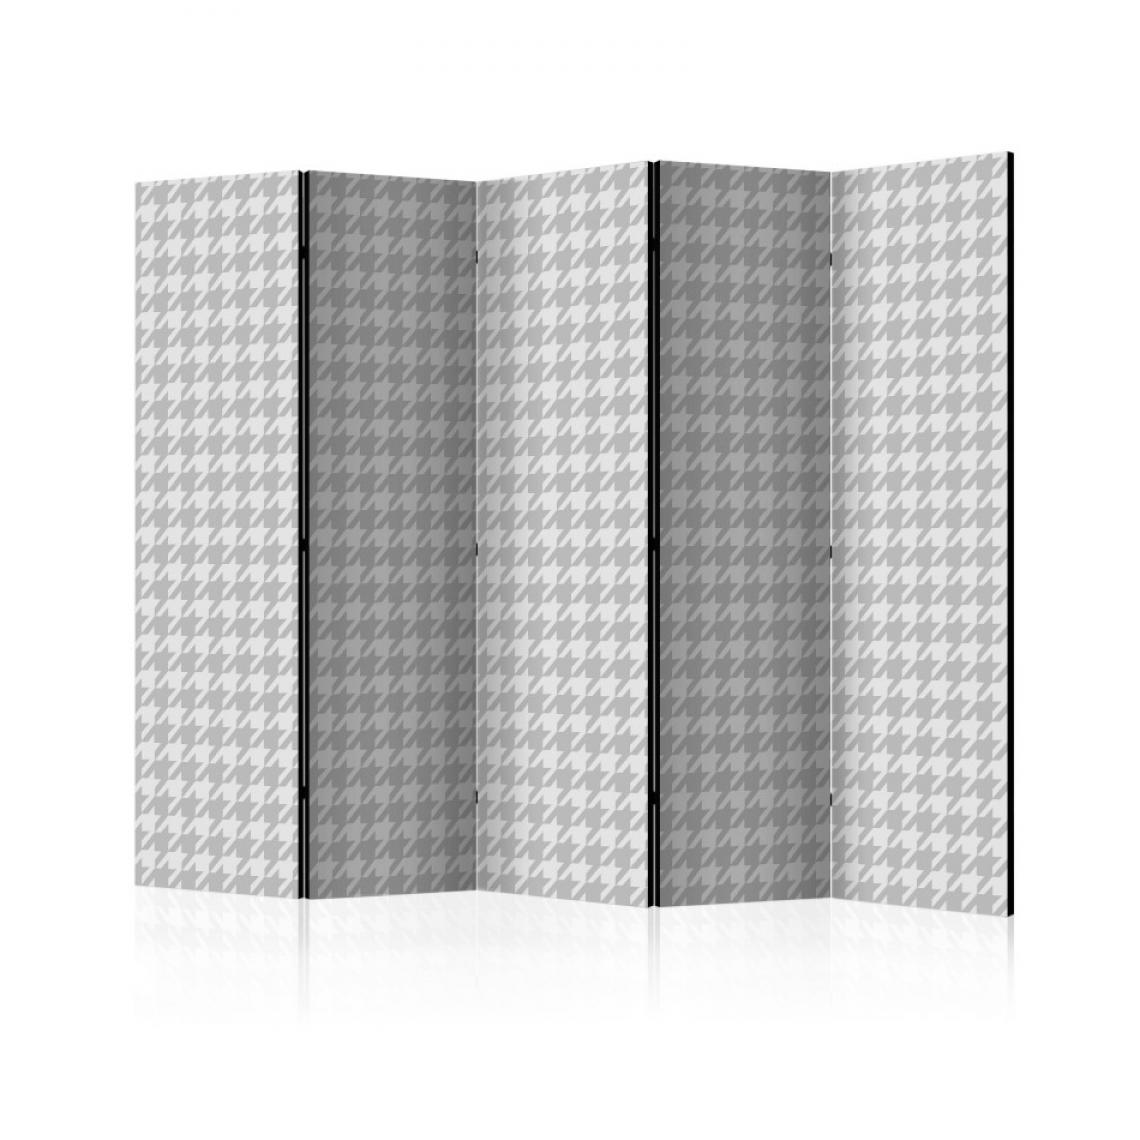 Artgeist - Paravent 5 volets - Dogtooth Check II [Room Dividers] 225x172 - Paravents